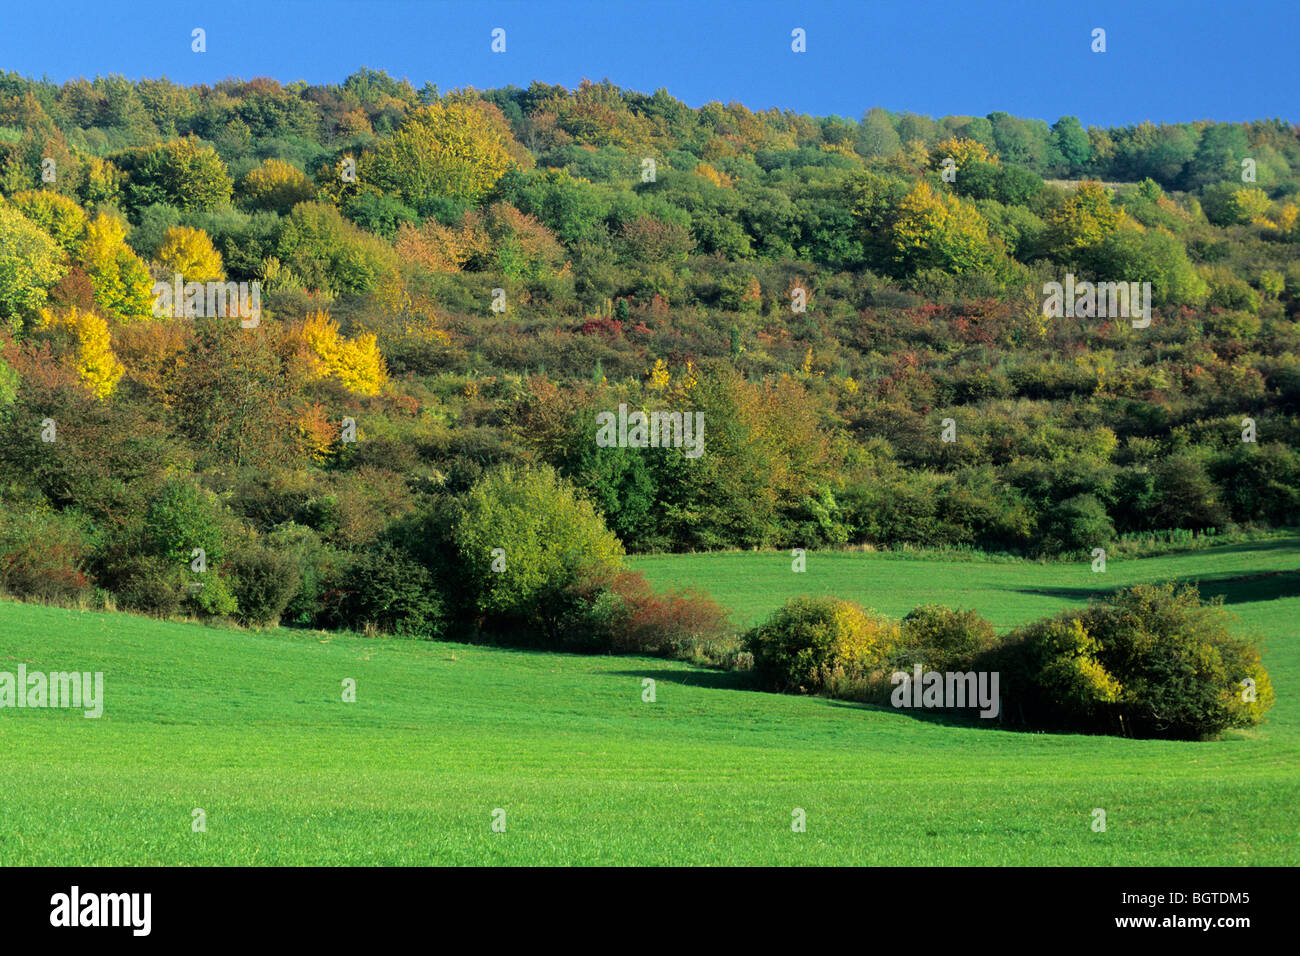 Hedge Landscape in Autumn colour, Germany Stock Photo